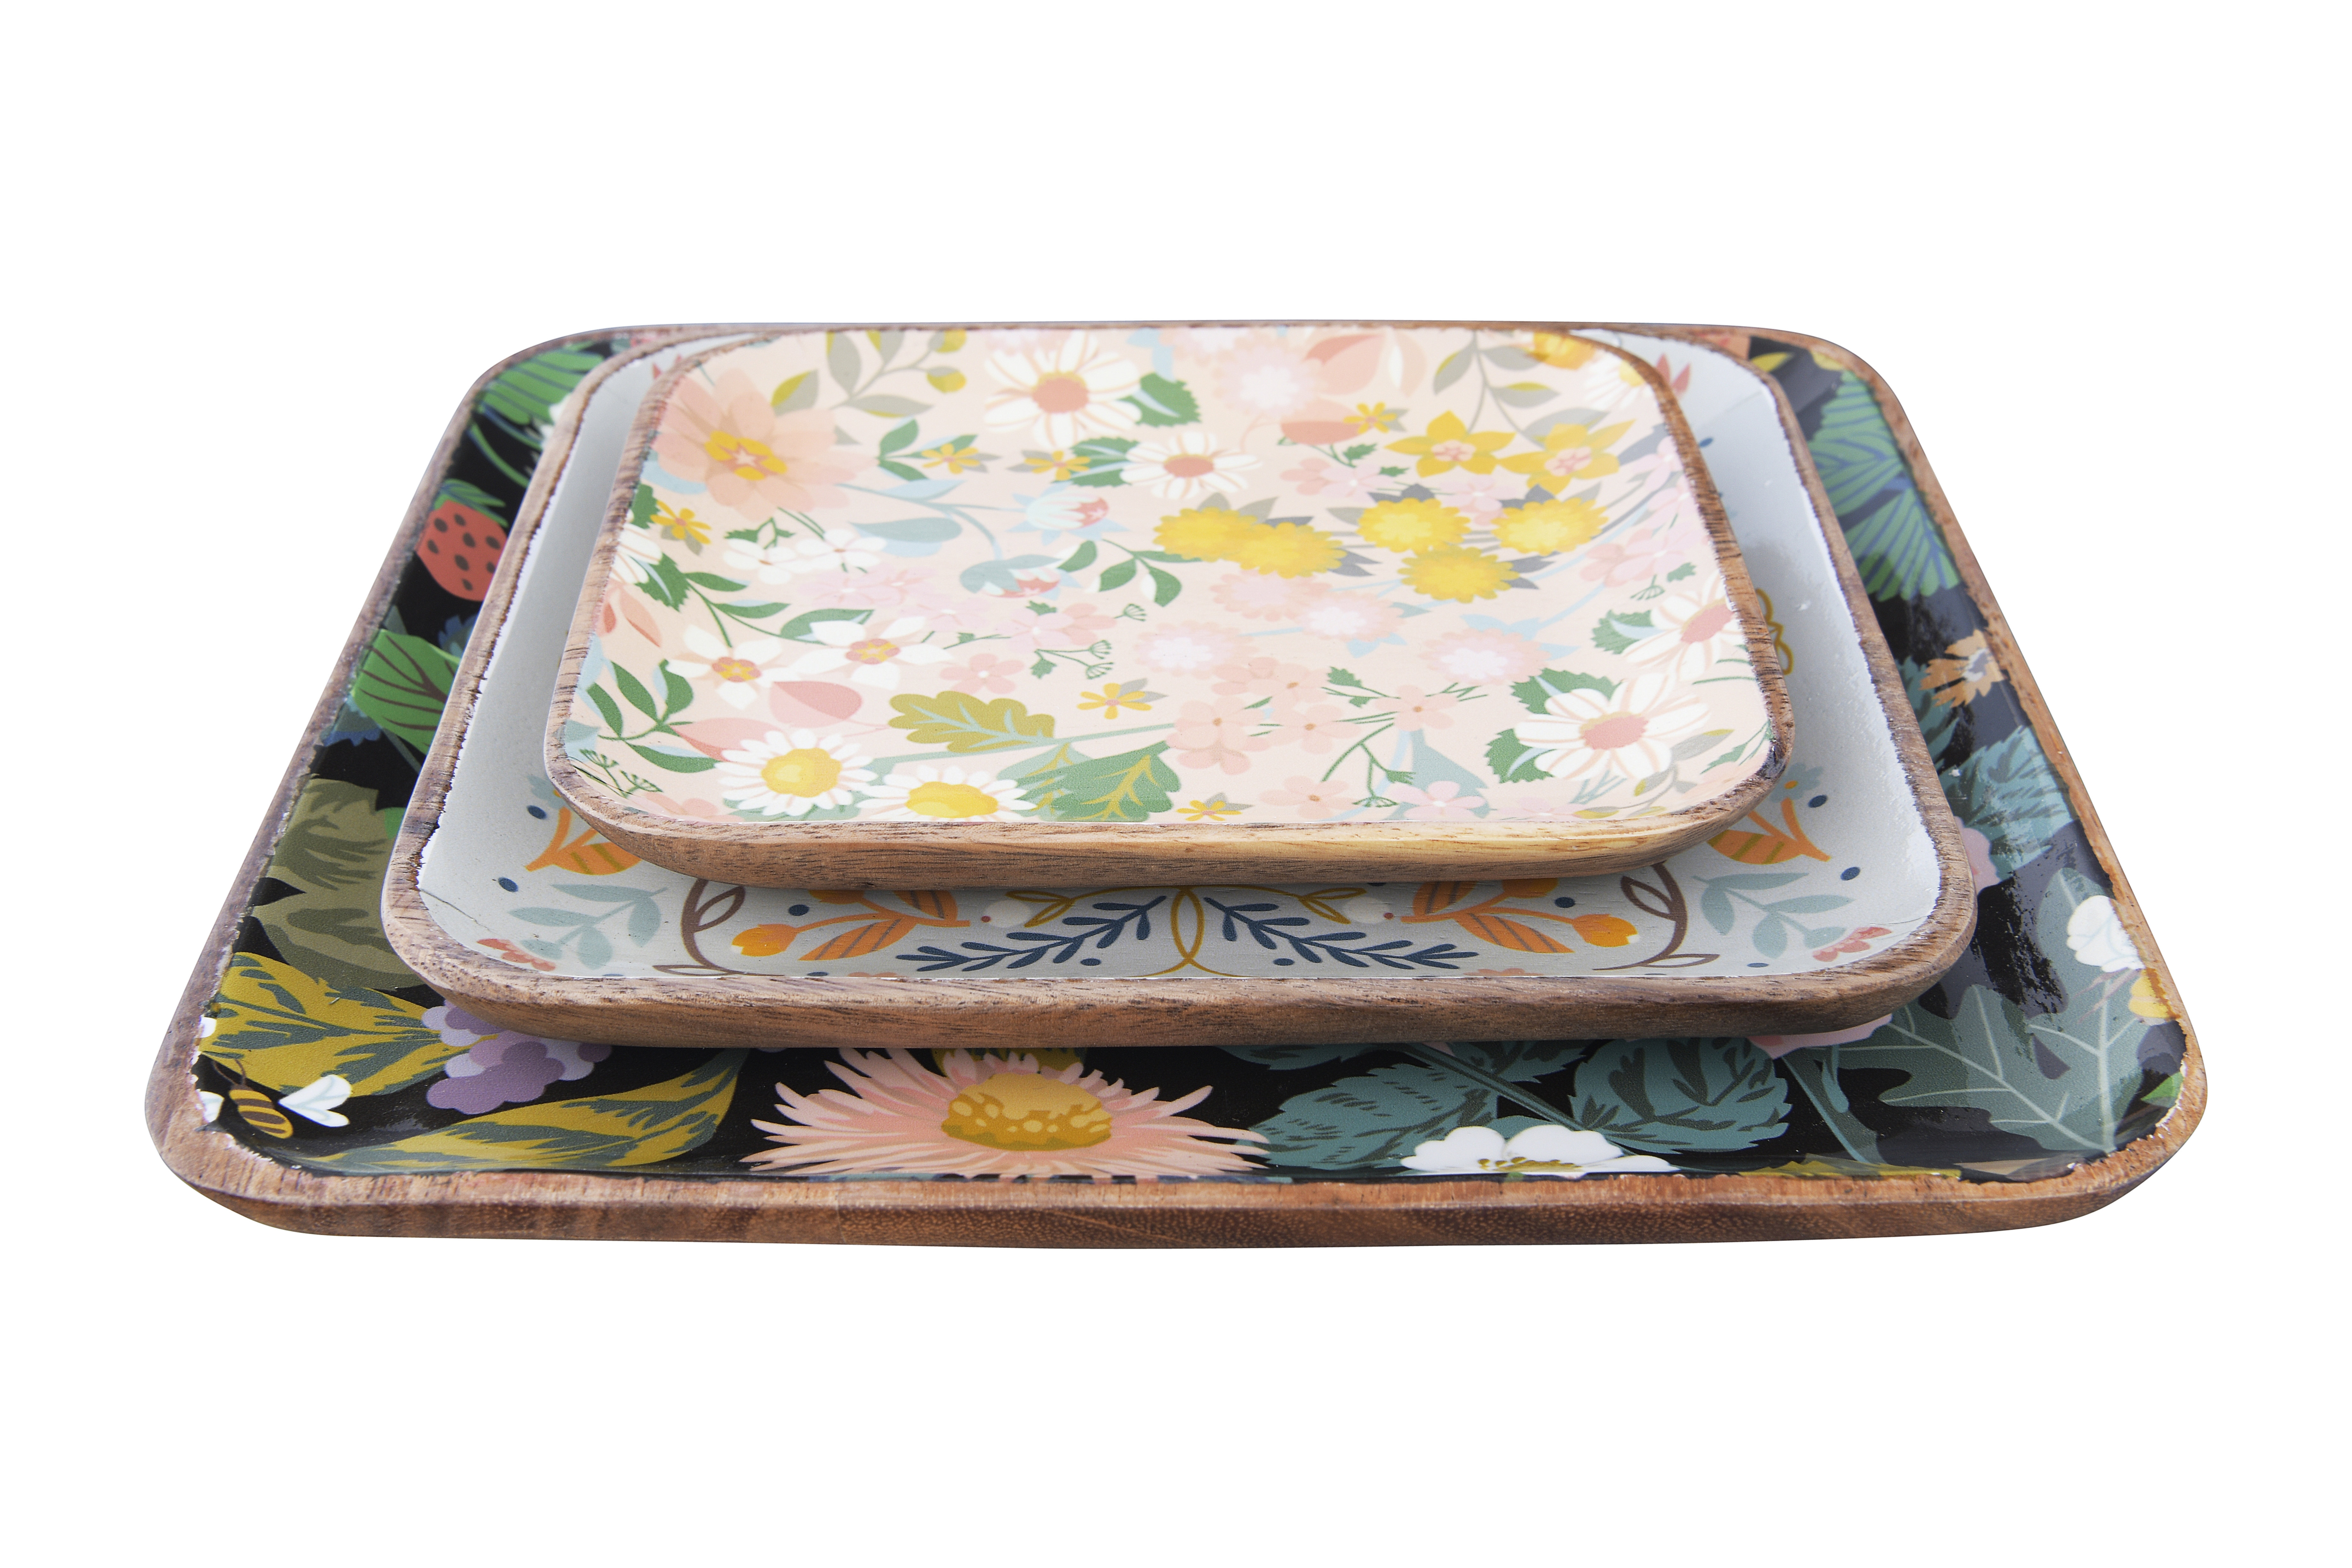 Square Enameled Acacia Wood Trays with Floral & Bee Patterns (Set of 3 Sizes/Patterns) - Image 0